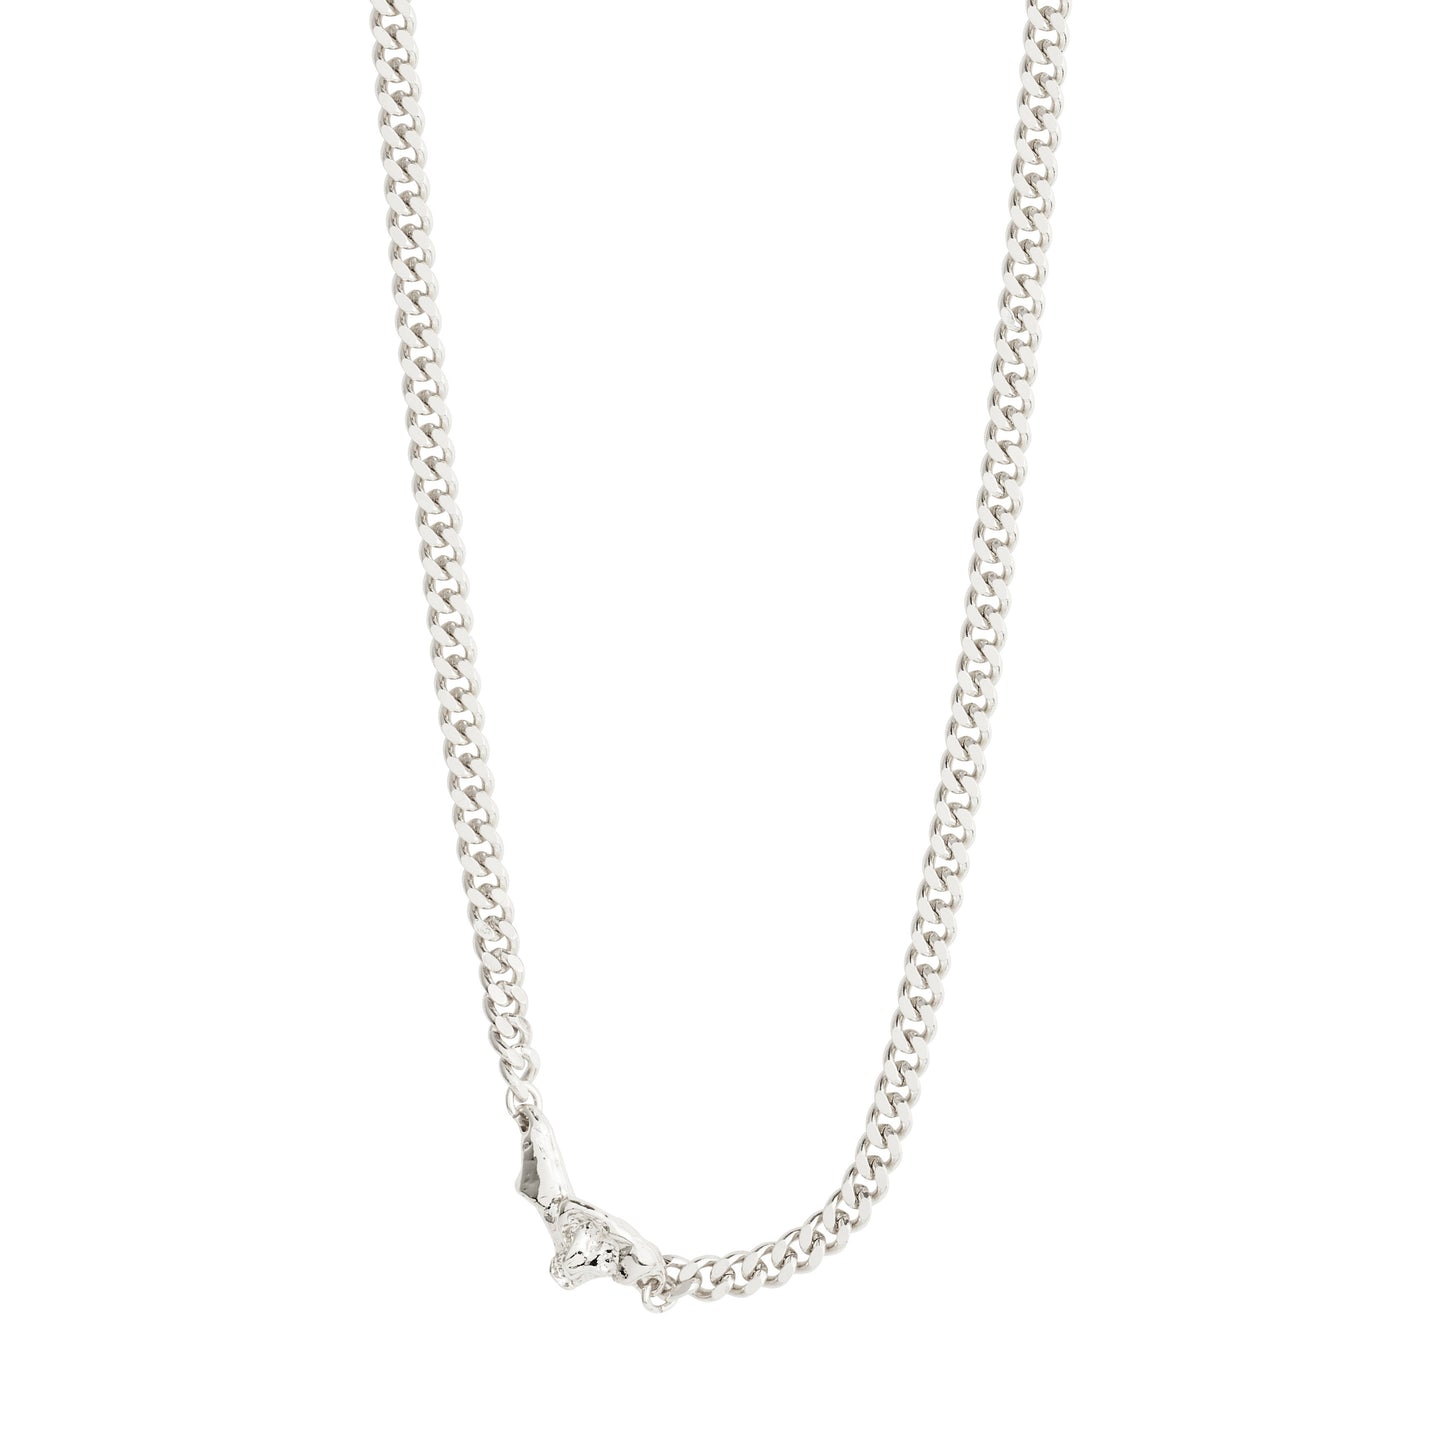 BREATHE recycled curb chain necklace silver-plated